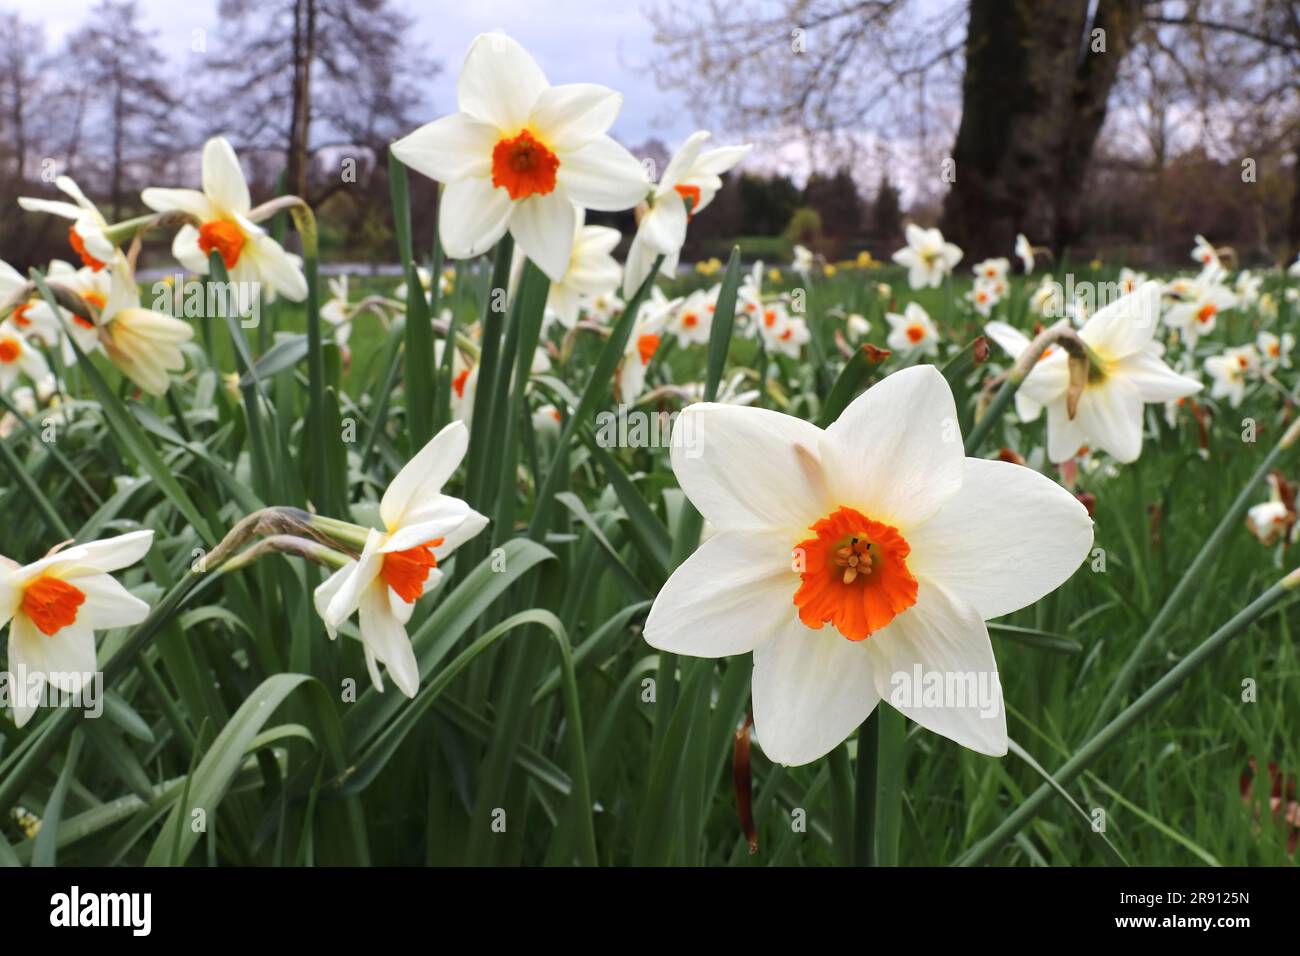 Spring meadow of blooming daffodils Stock Photo